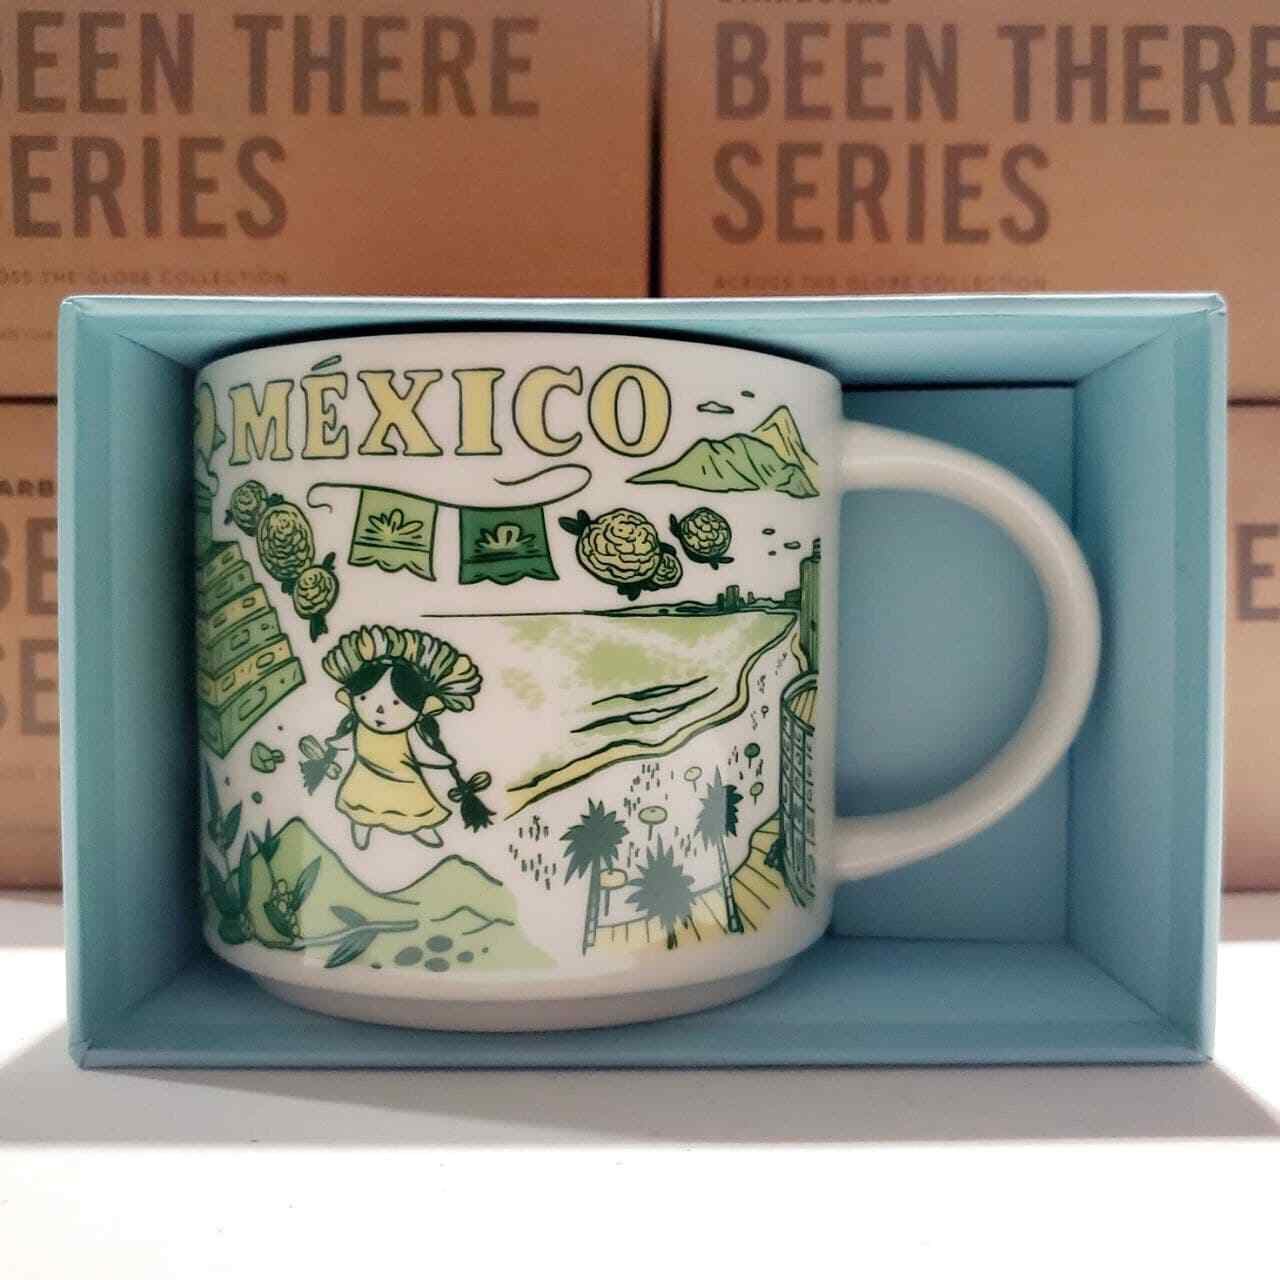 Starbucks Mexico Been There Series Collectible Mug